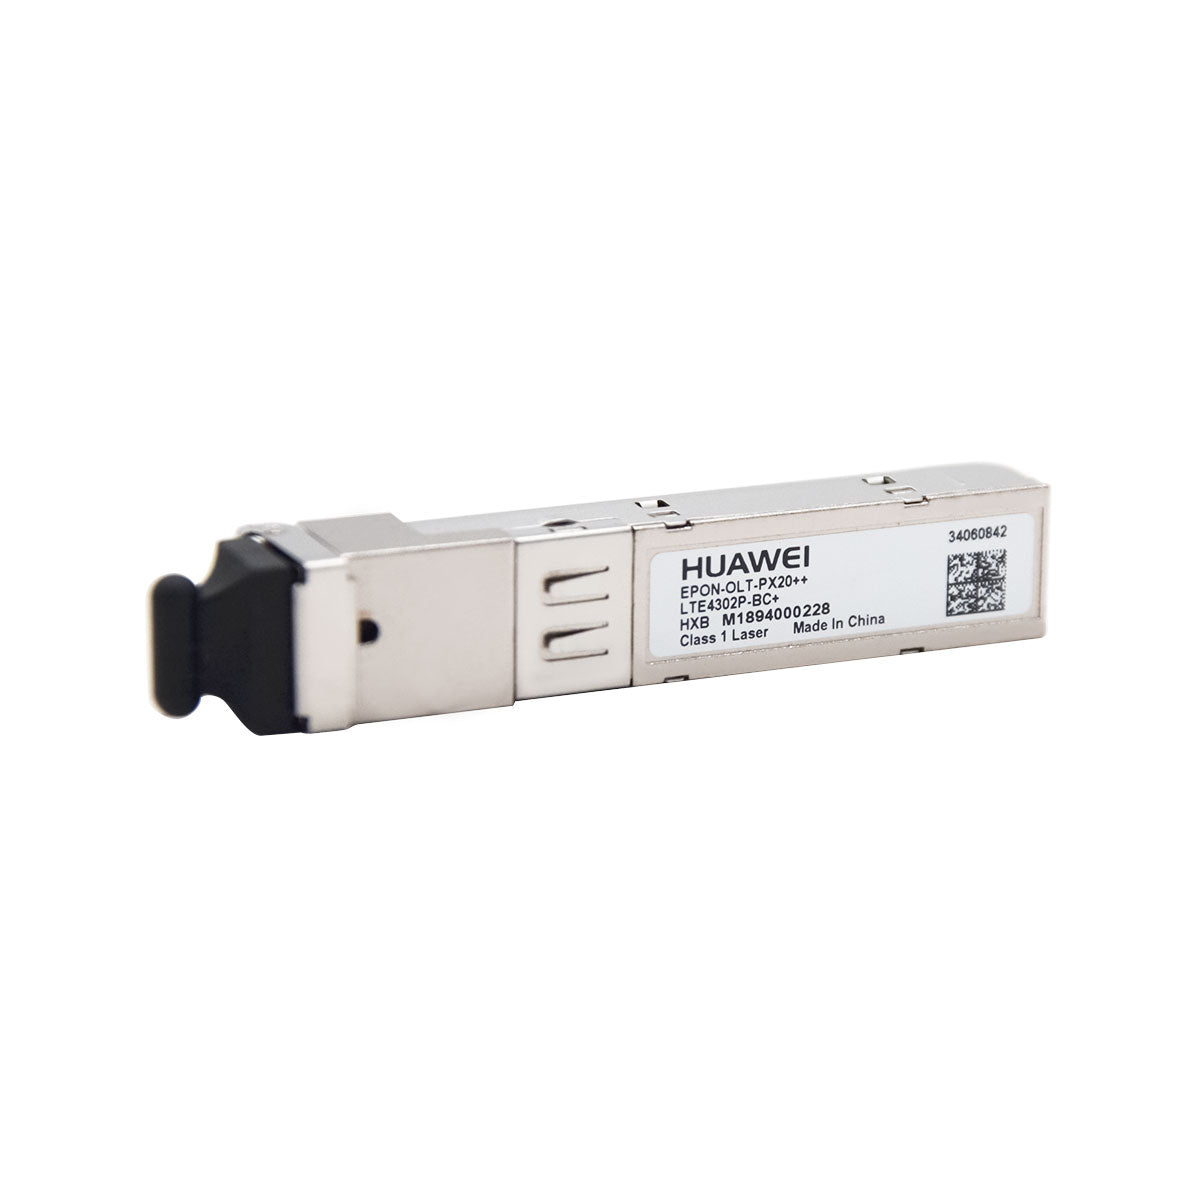 Huawei Original LTE4302P-BC+, HXB, EPON-OLT-PX20++ SFP for Huawei EPON board, 34060842